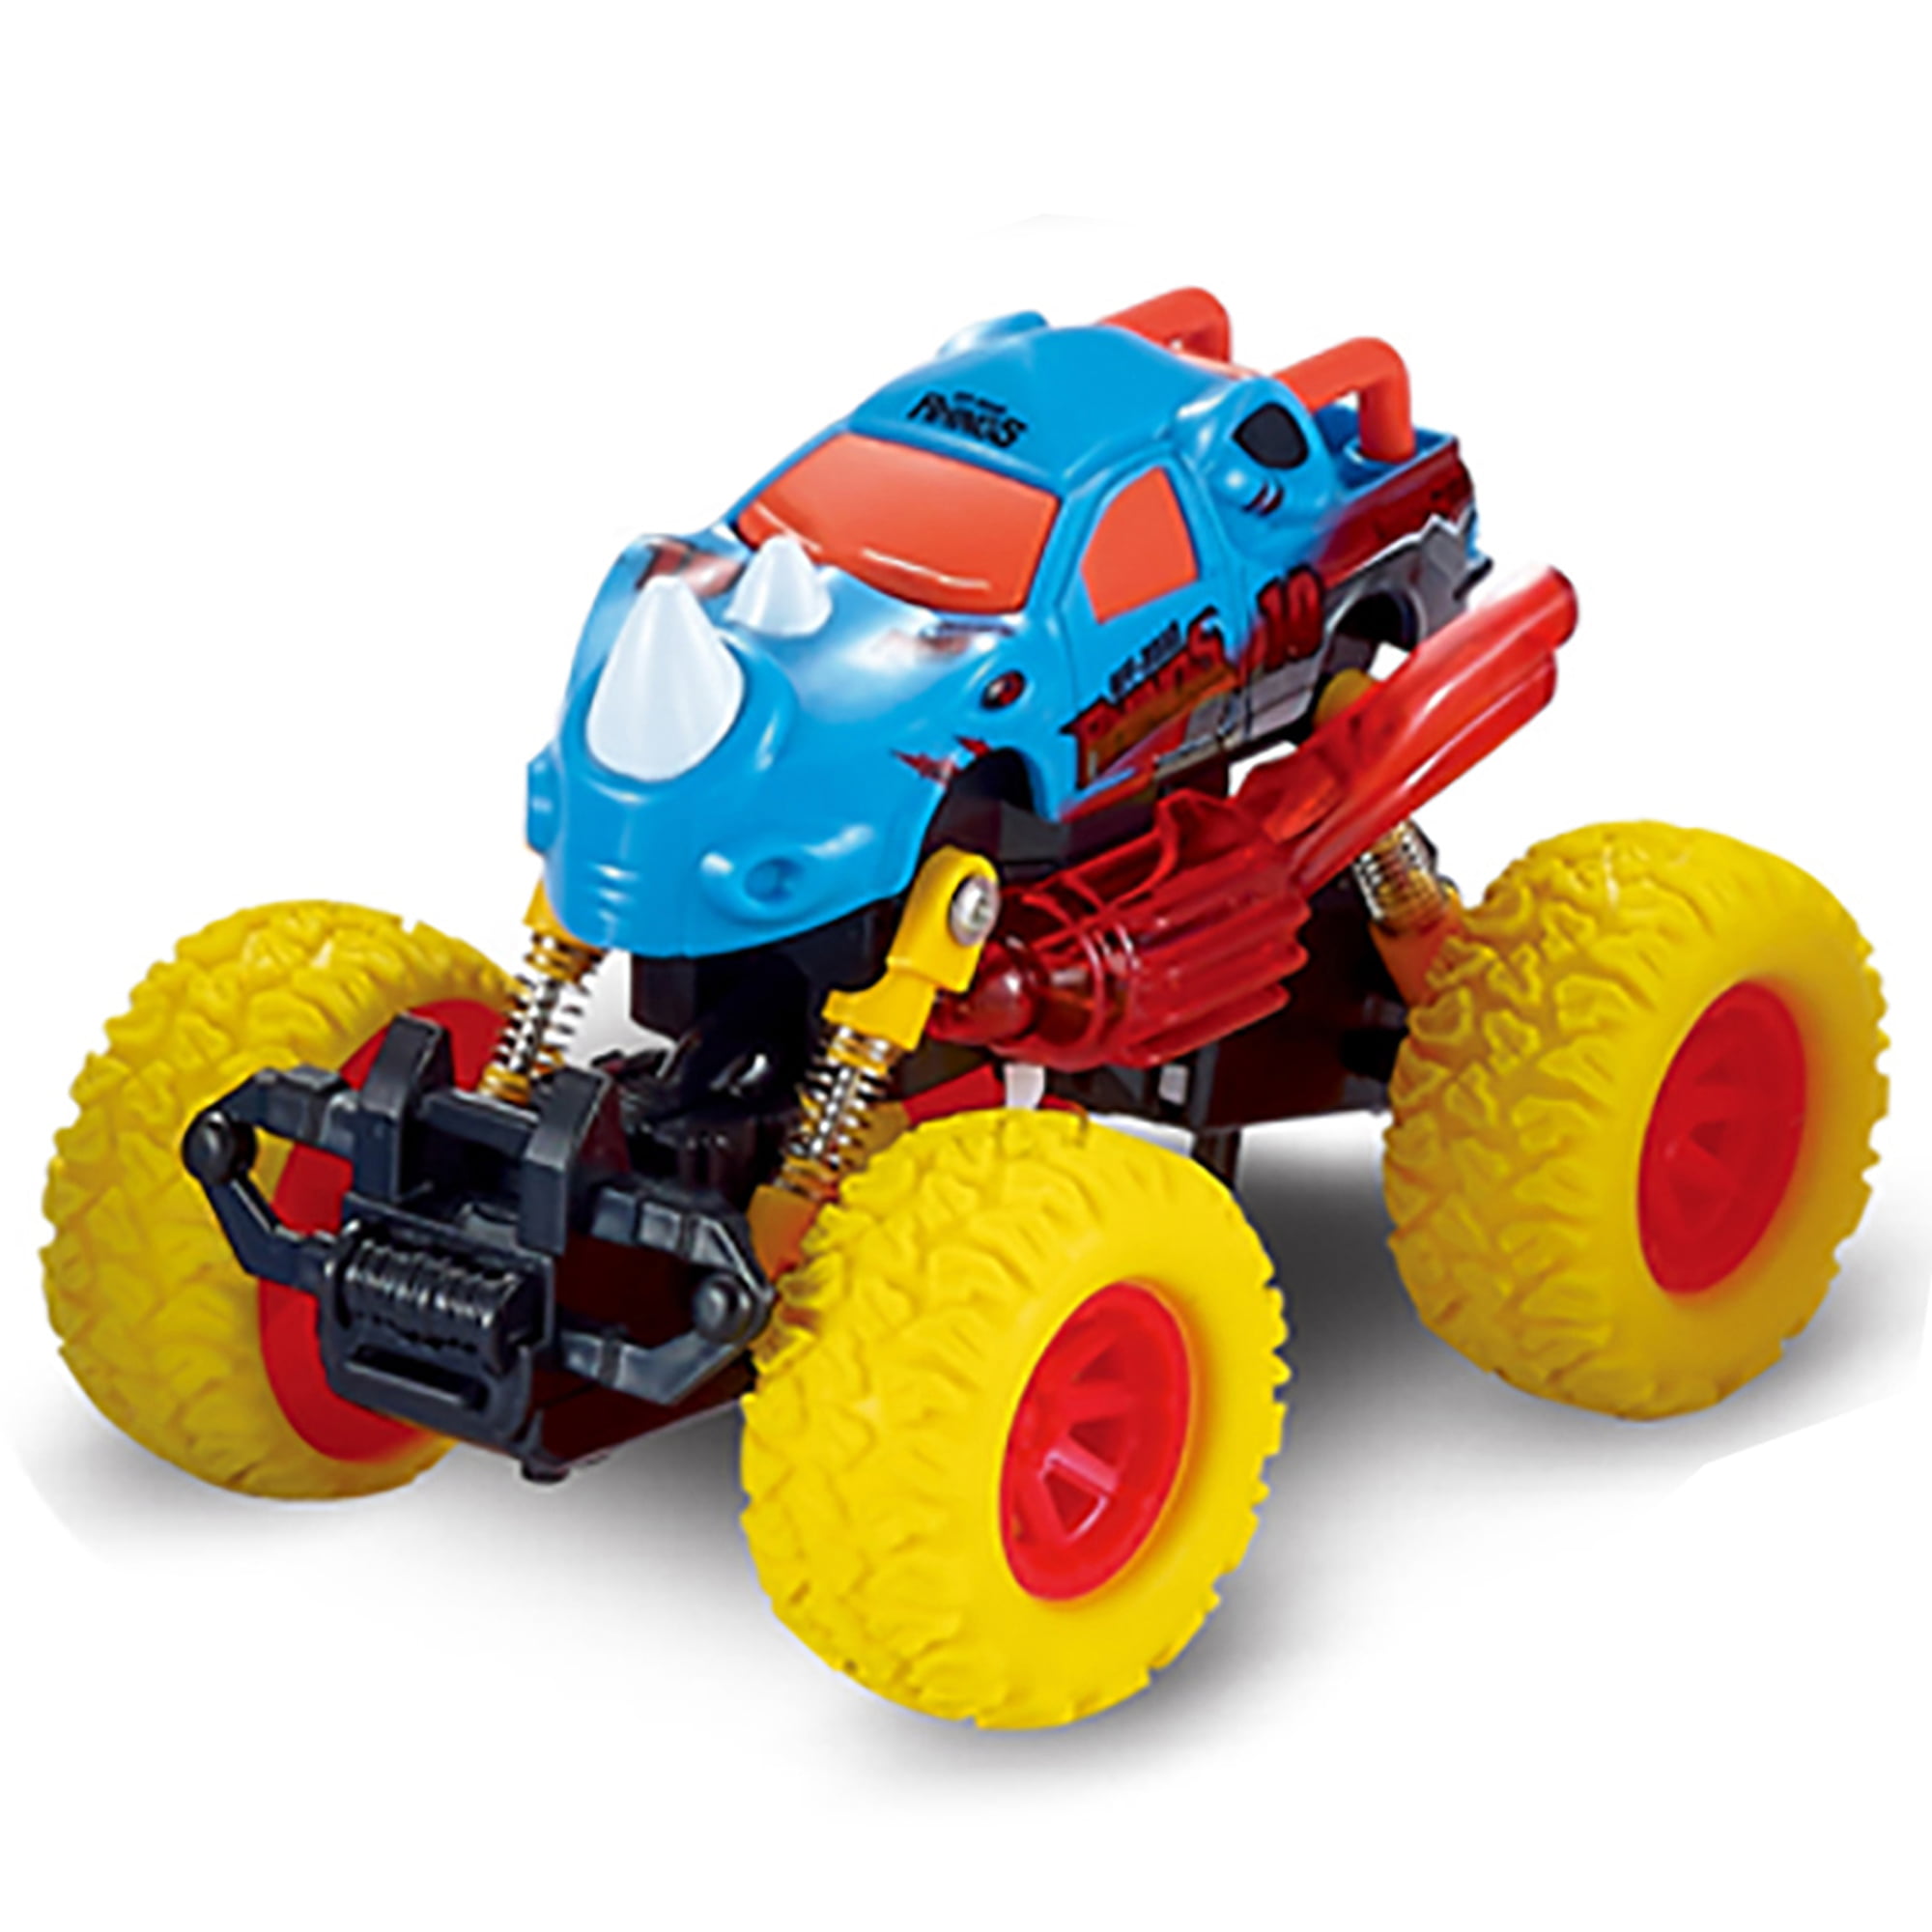 Trucks Car Kids Toys Toddler Vehicle Cool Toy For Boys Birthday Gift